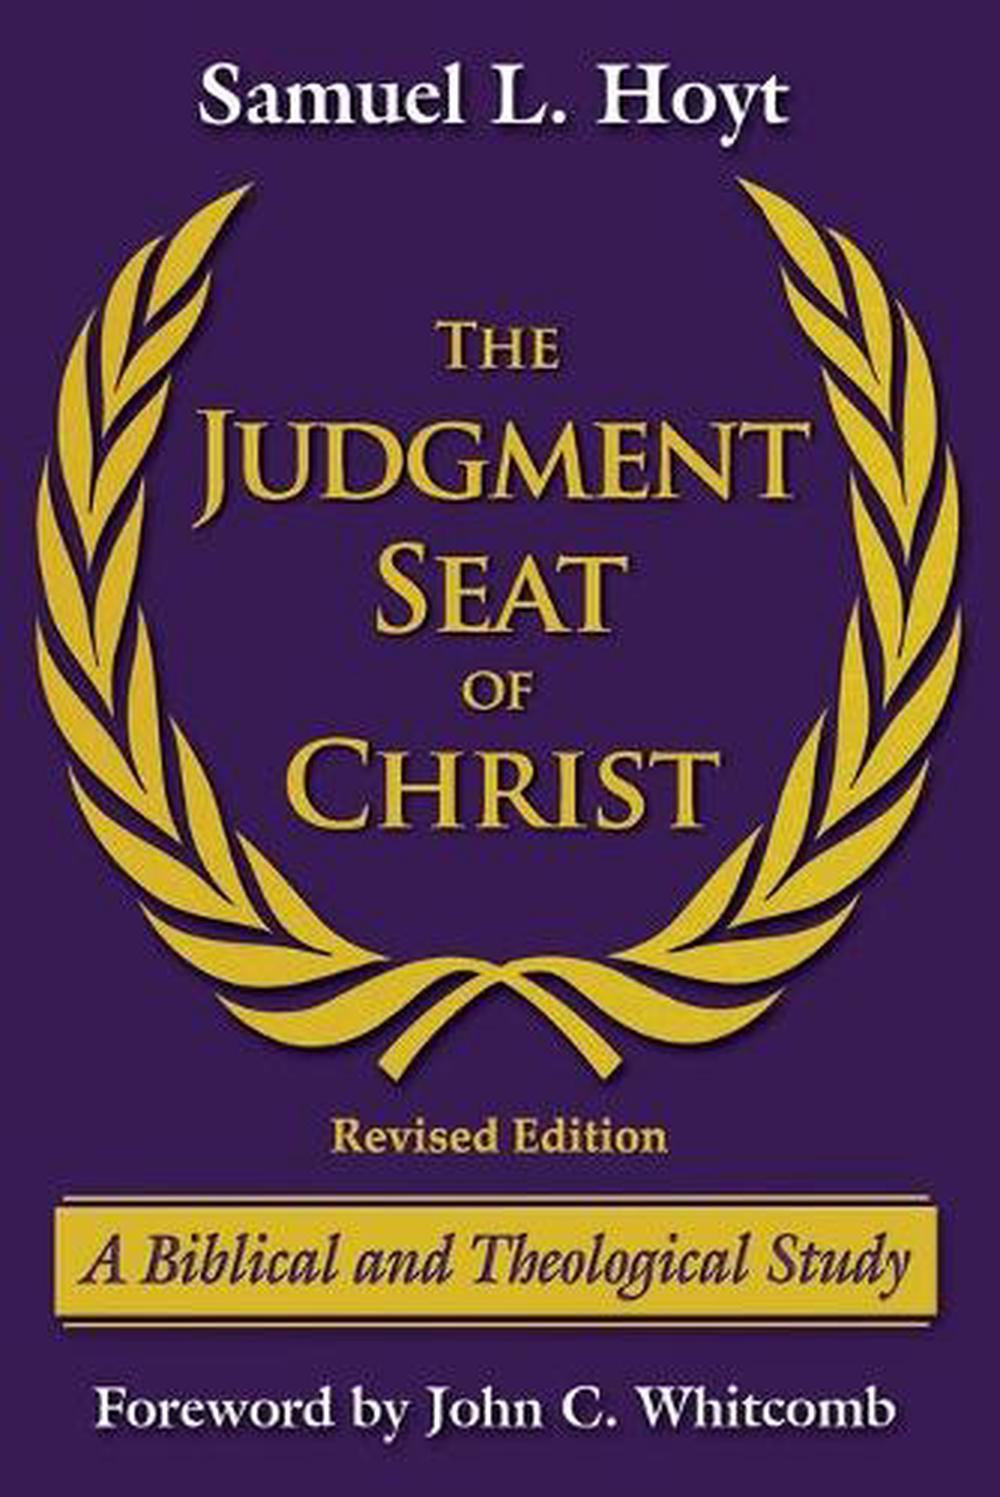 the judgment seat of christ and unconfessed sins samuel